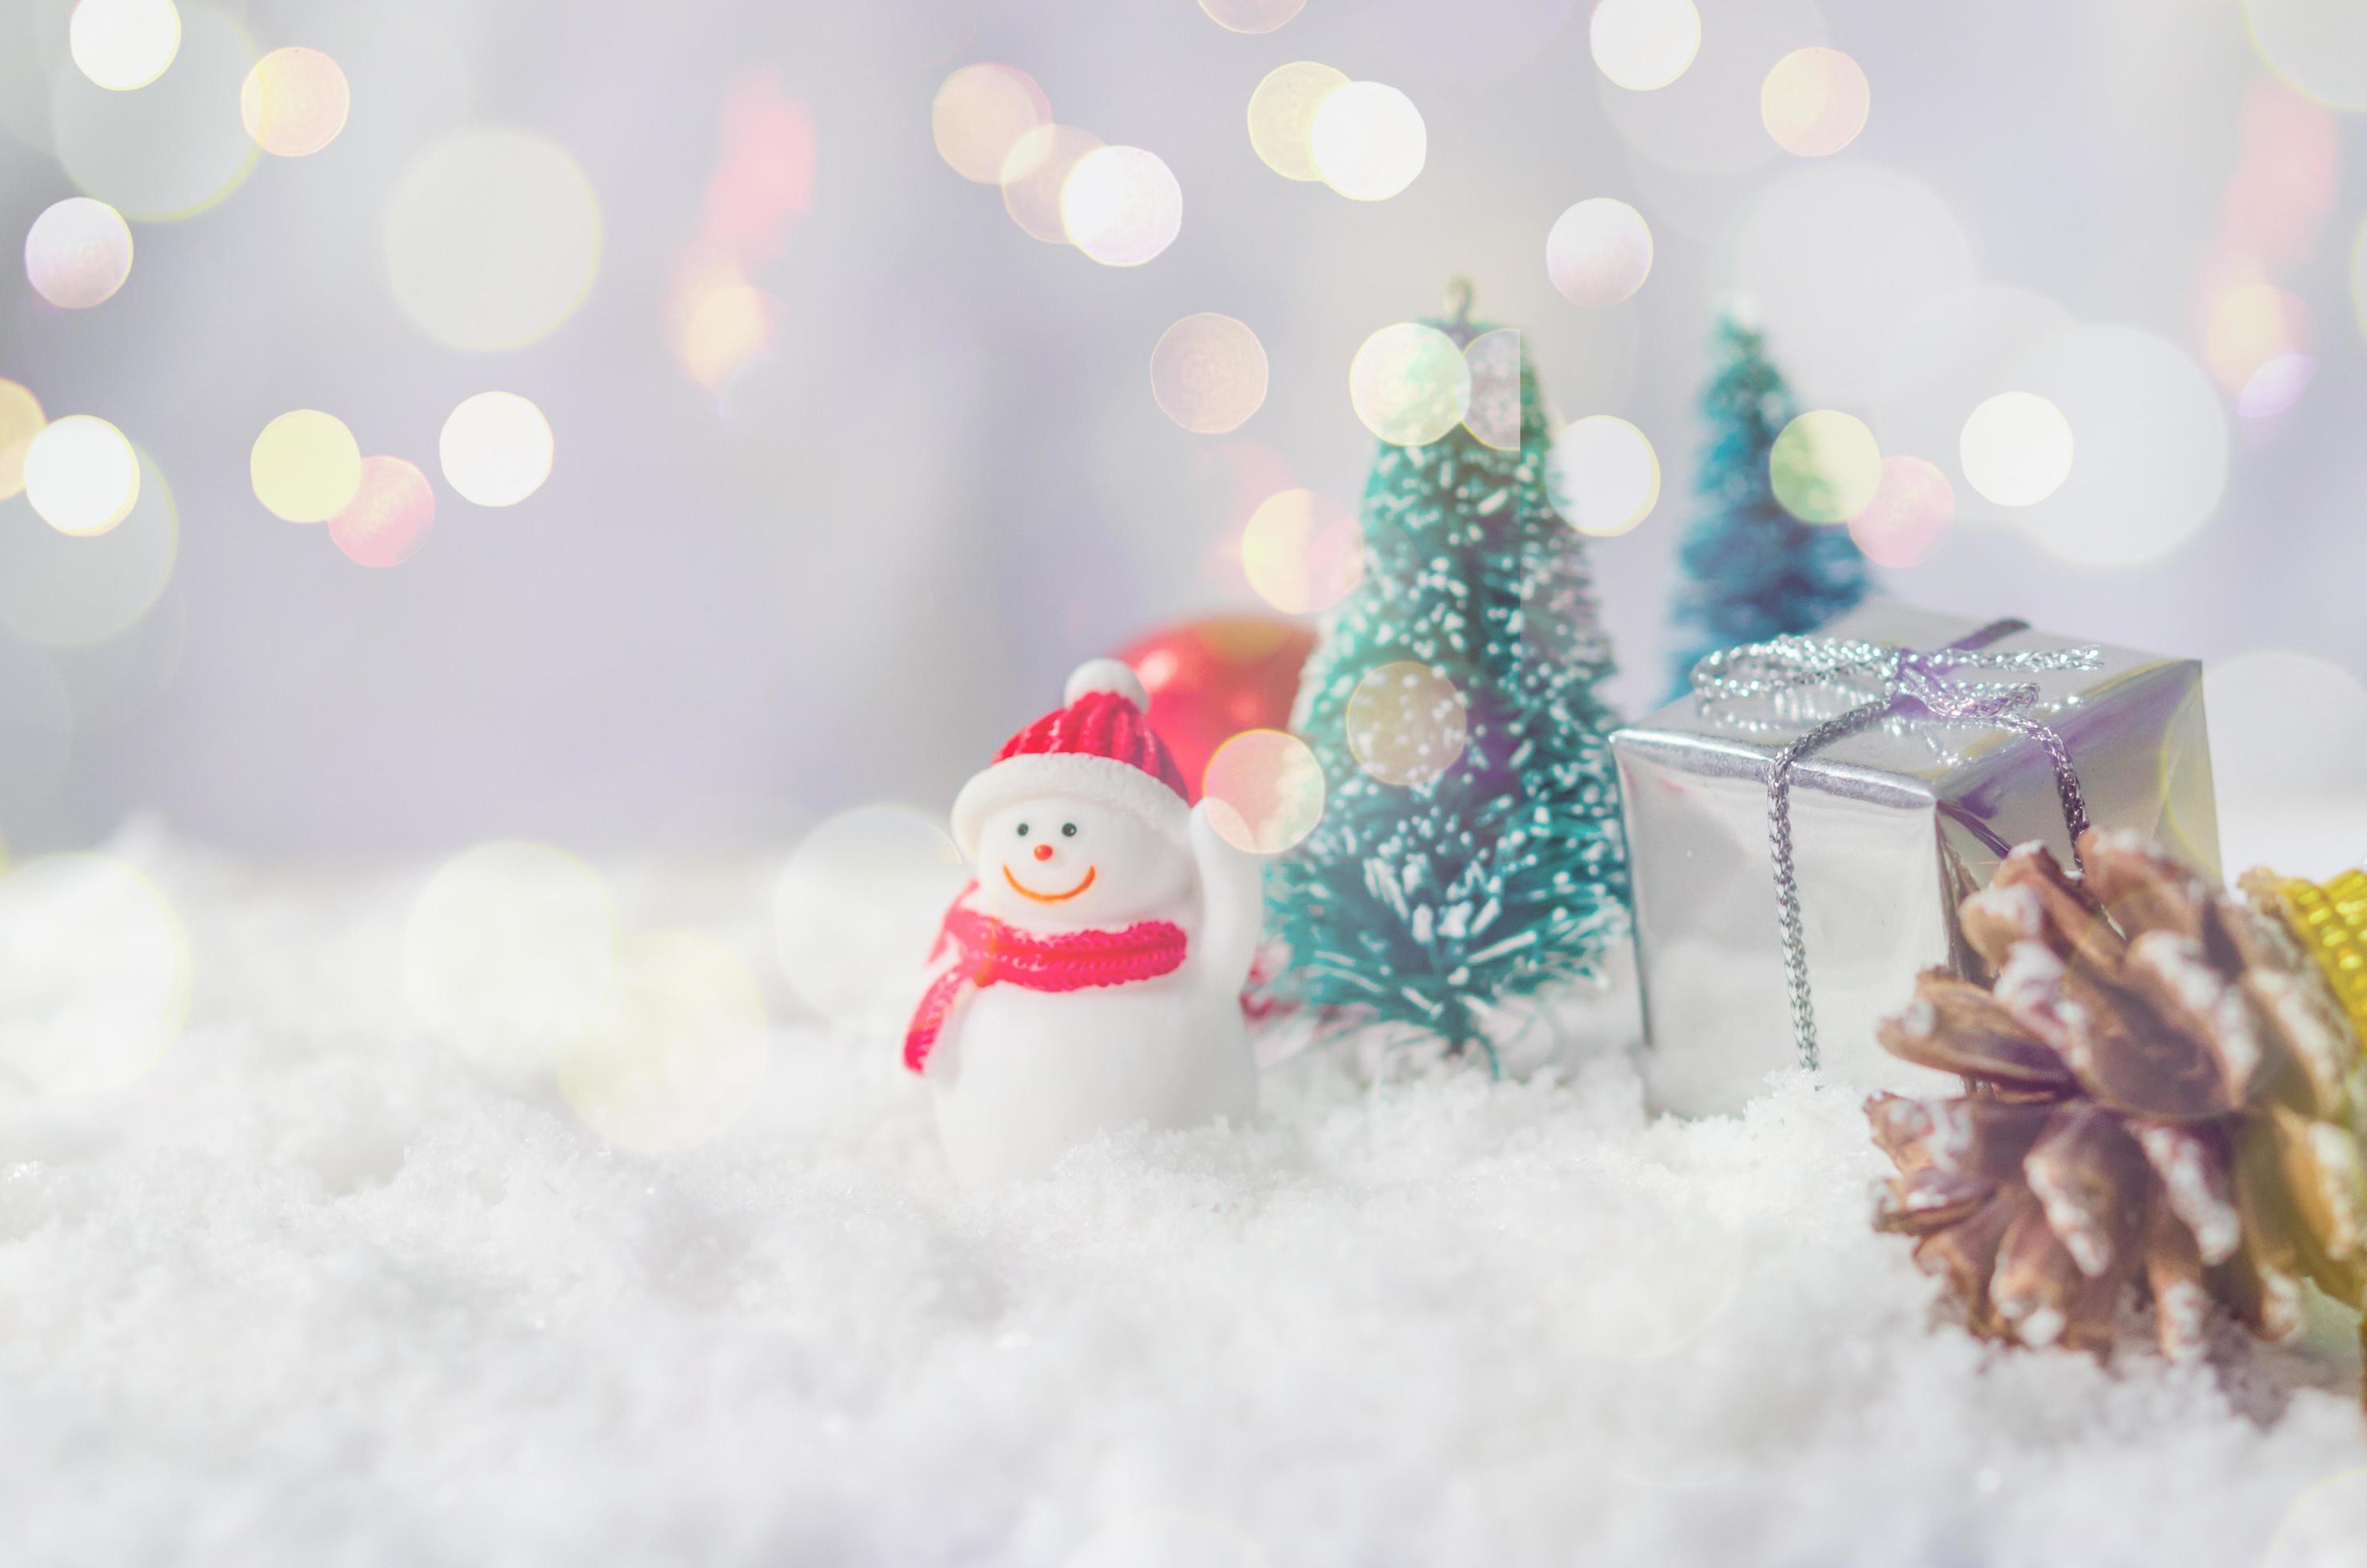 Miniature Christmas decorations in snow 1782983 Stock Photo at Vecteezy